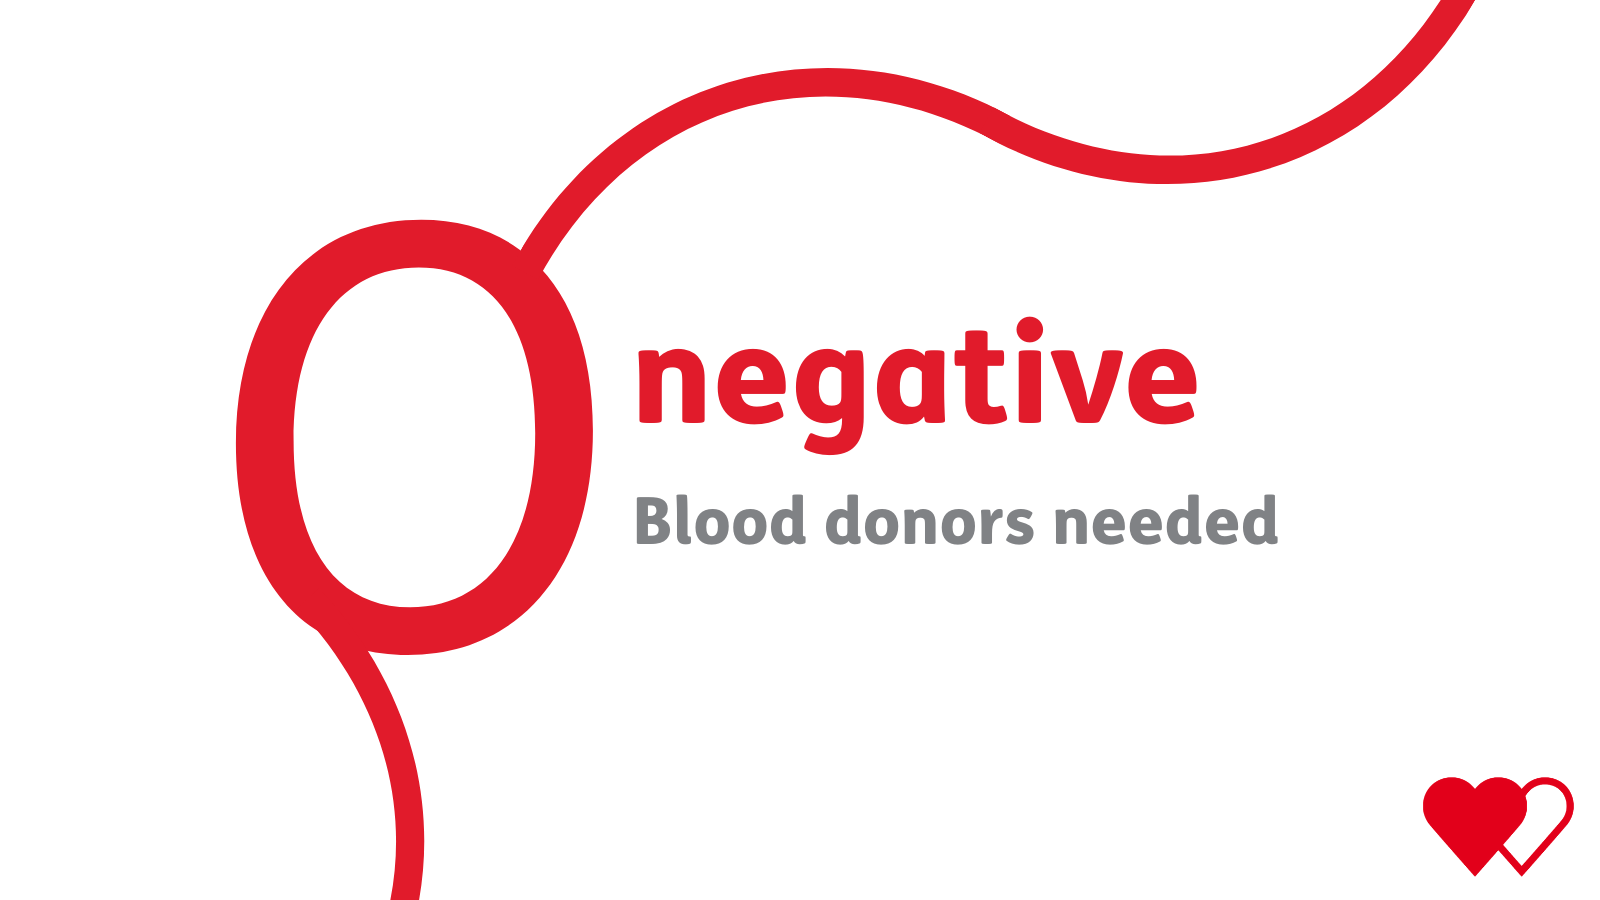 Welsh Blood Service - image with the words - "O negative blood donors needed"